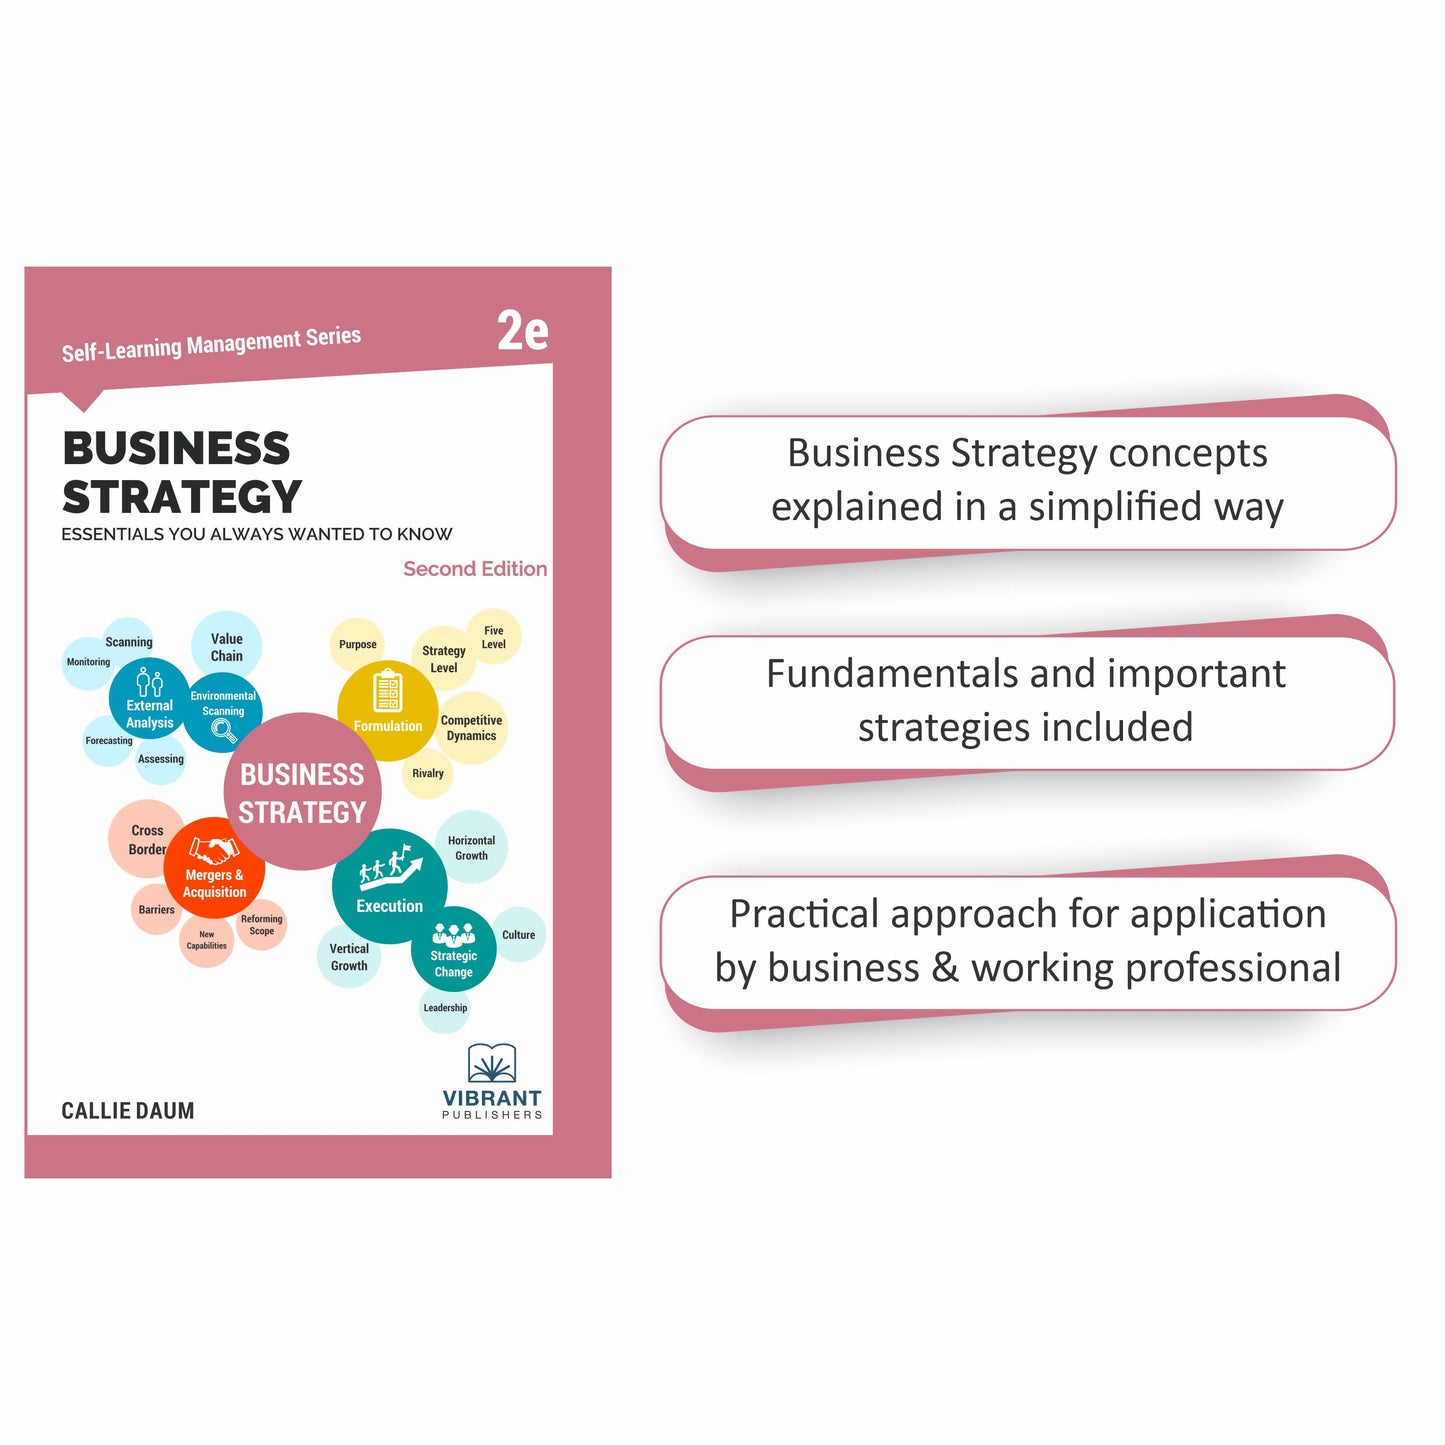 Business Strategy and Planning Fundamentals - Includes a guide on Business Laws in the US